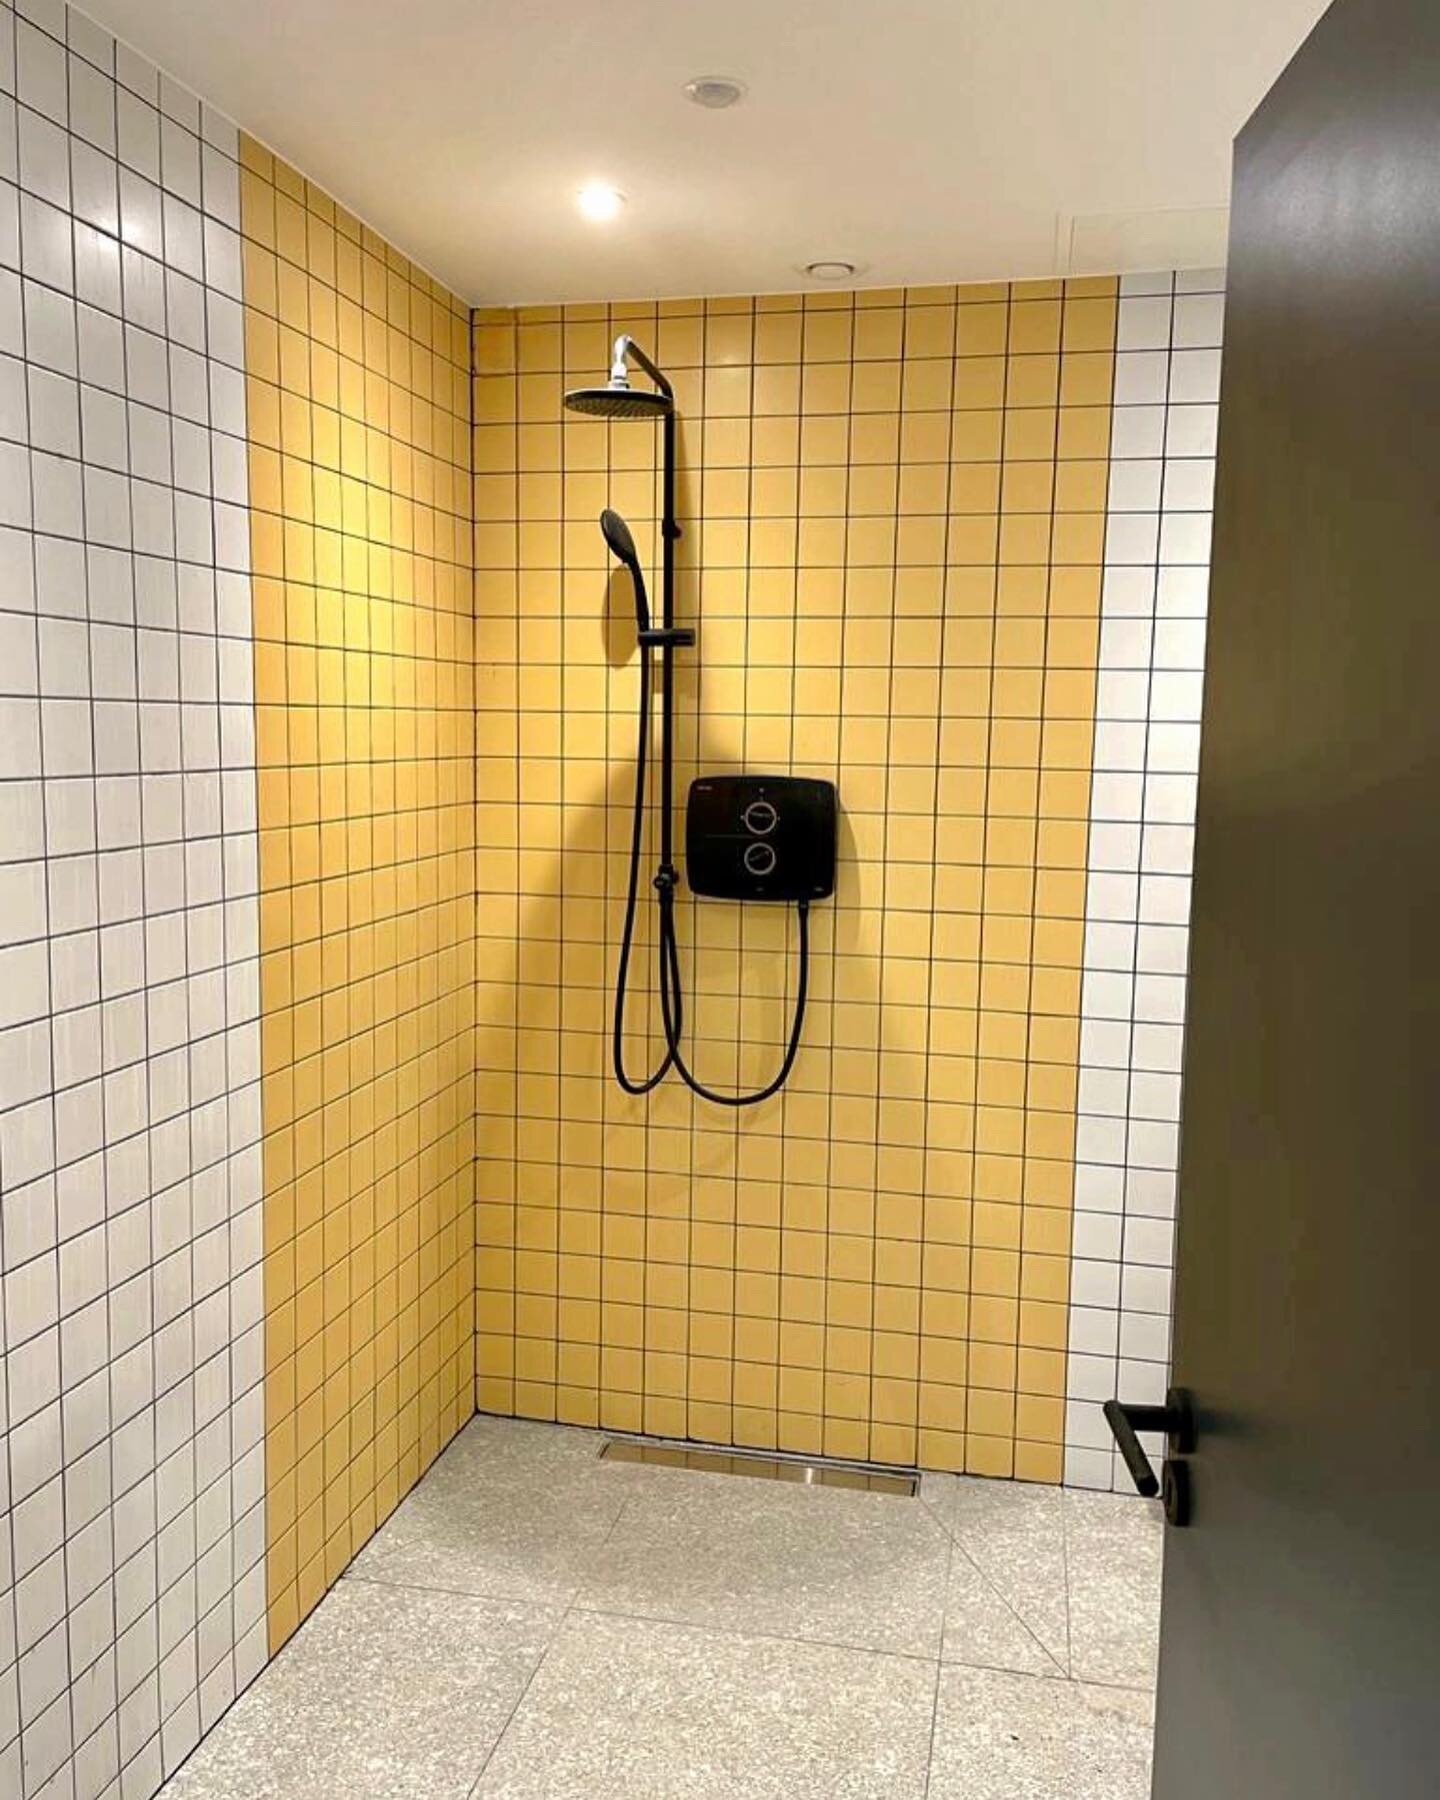 Photos from a recently completed commercial project. The space consisted of 3 car parking spots in an underground carpark. The brief was to create 3 vibrant shower rooms for commuting cyclists. This was achieved with careful planning and colourful ti